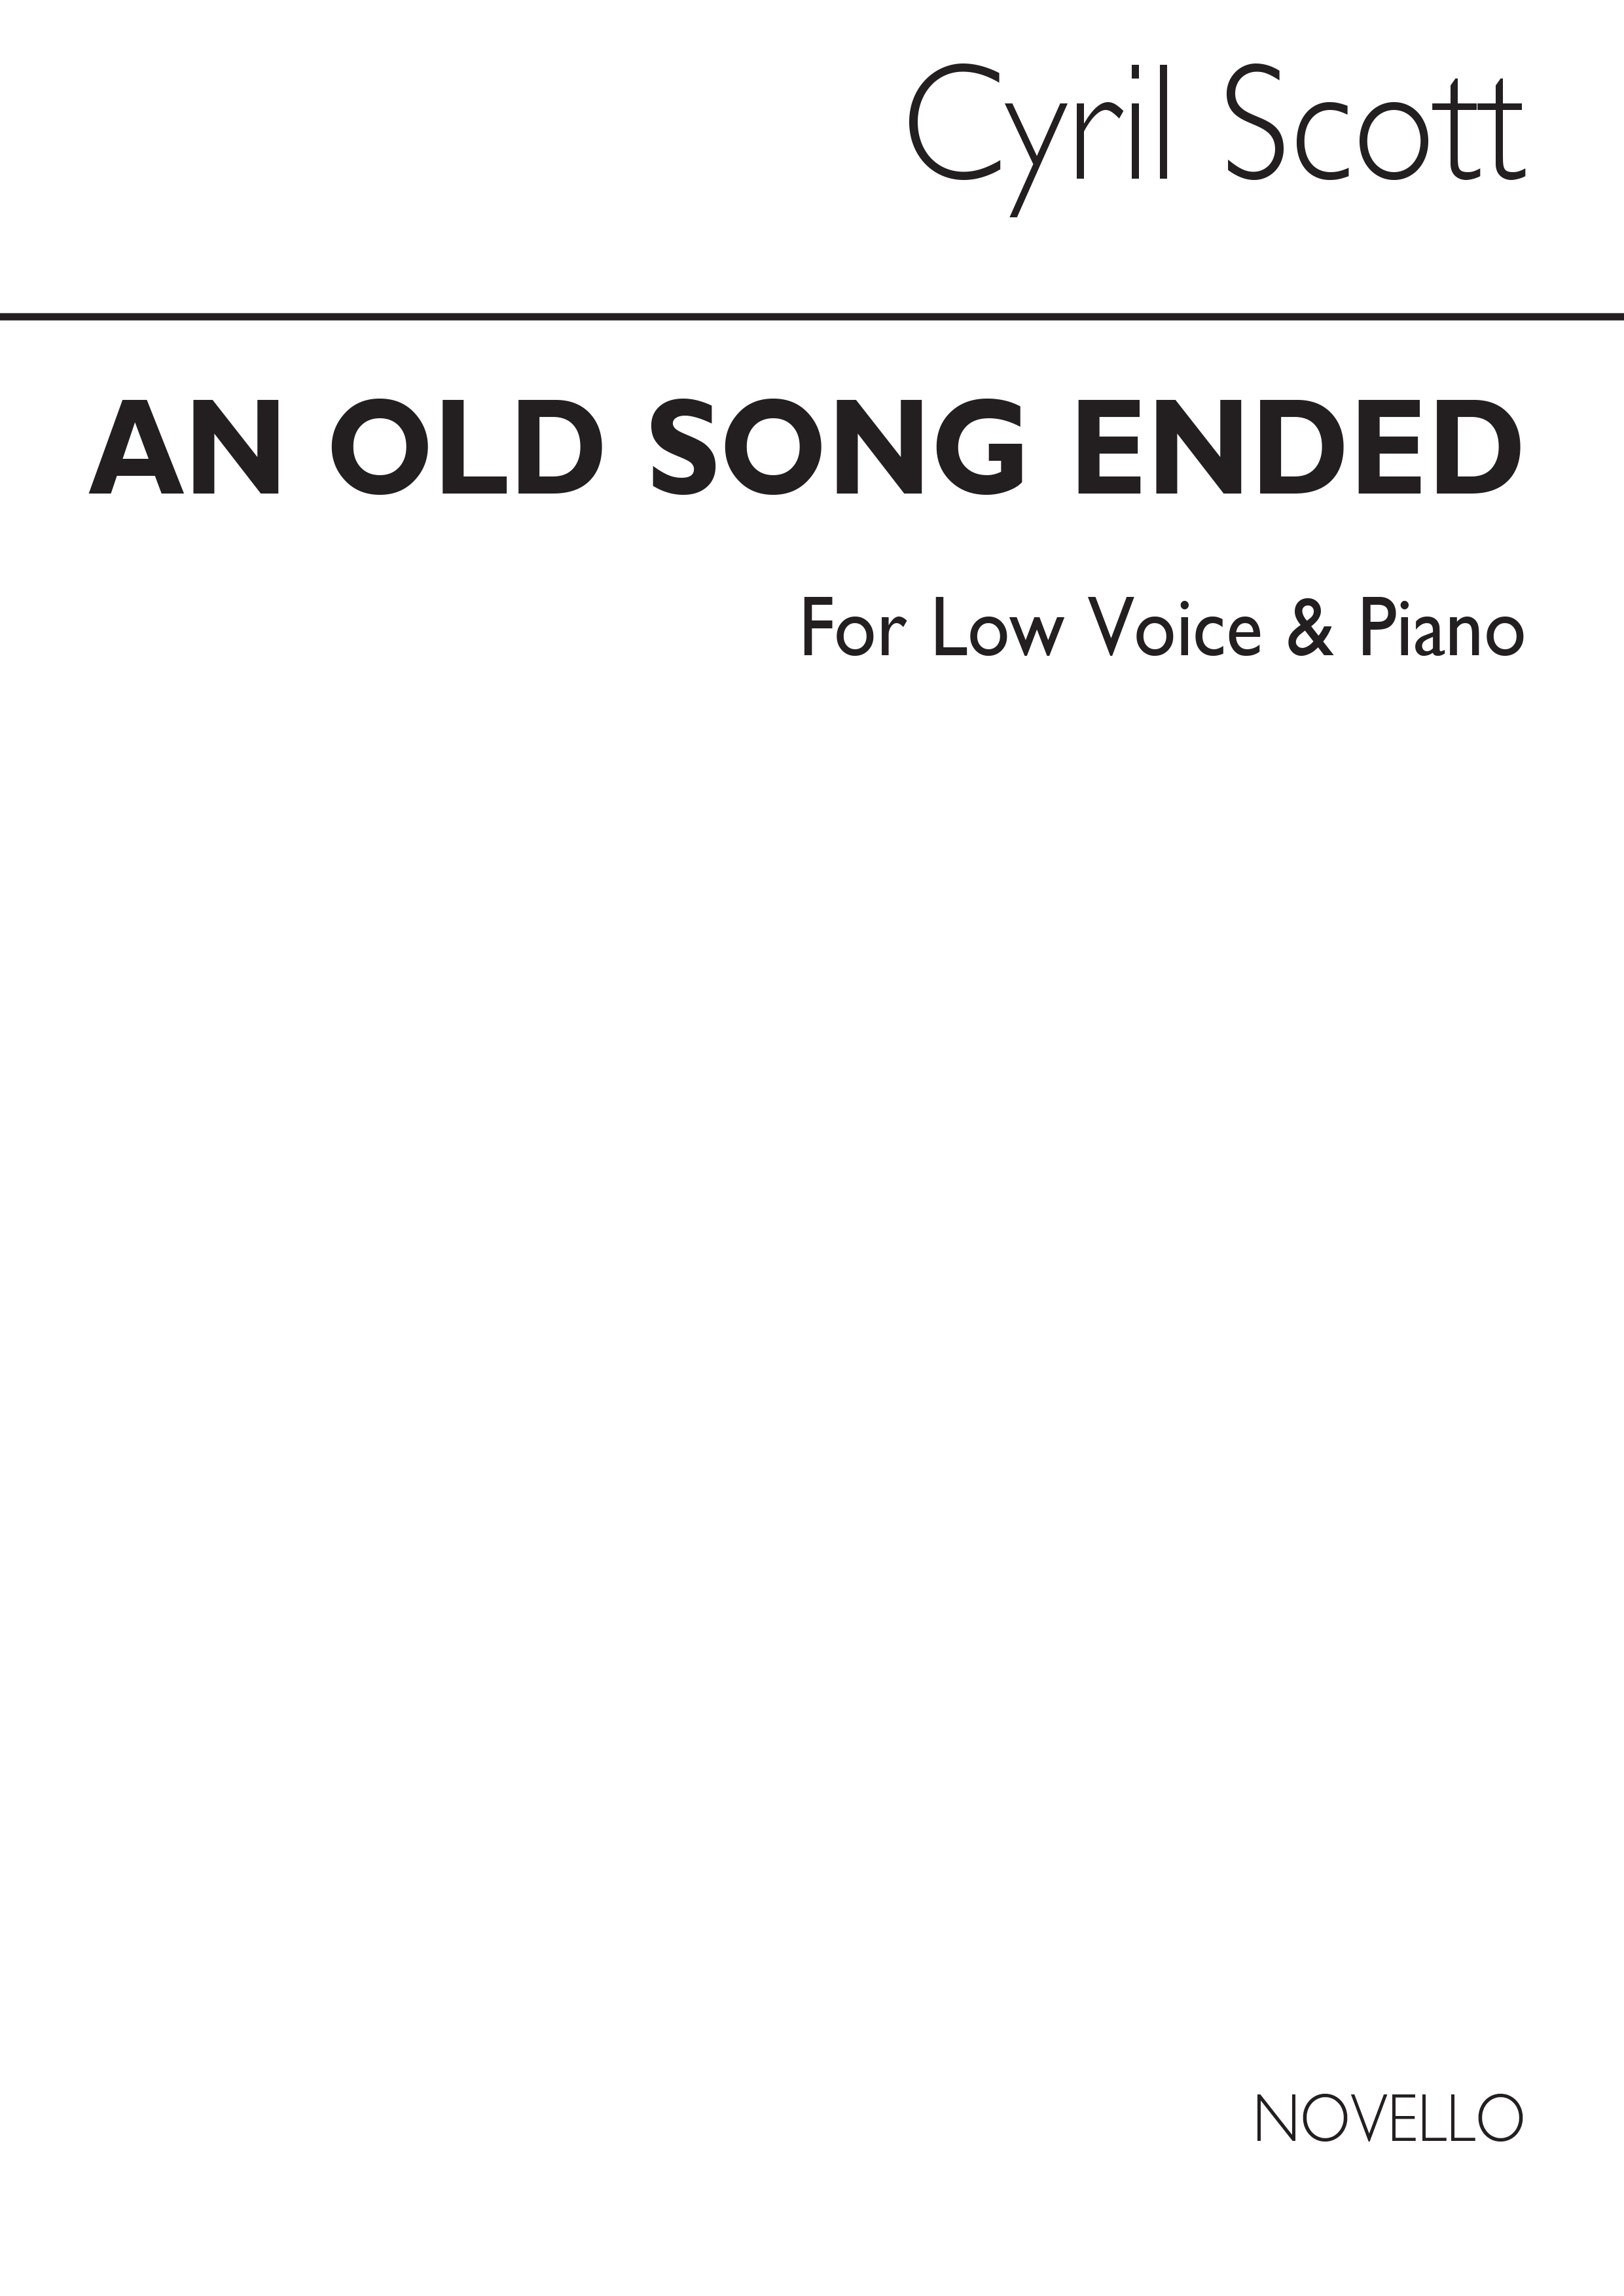 Cyril Scott: An Old Song Ended-low Voice/Piano (Key-e Flat): Low Voice: Vocal